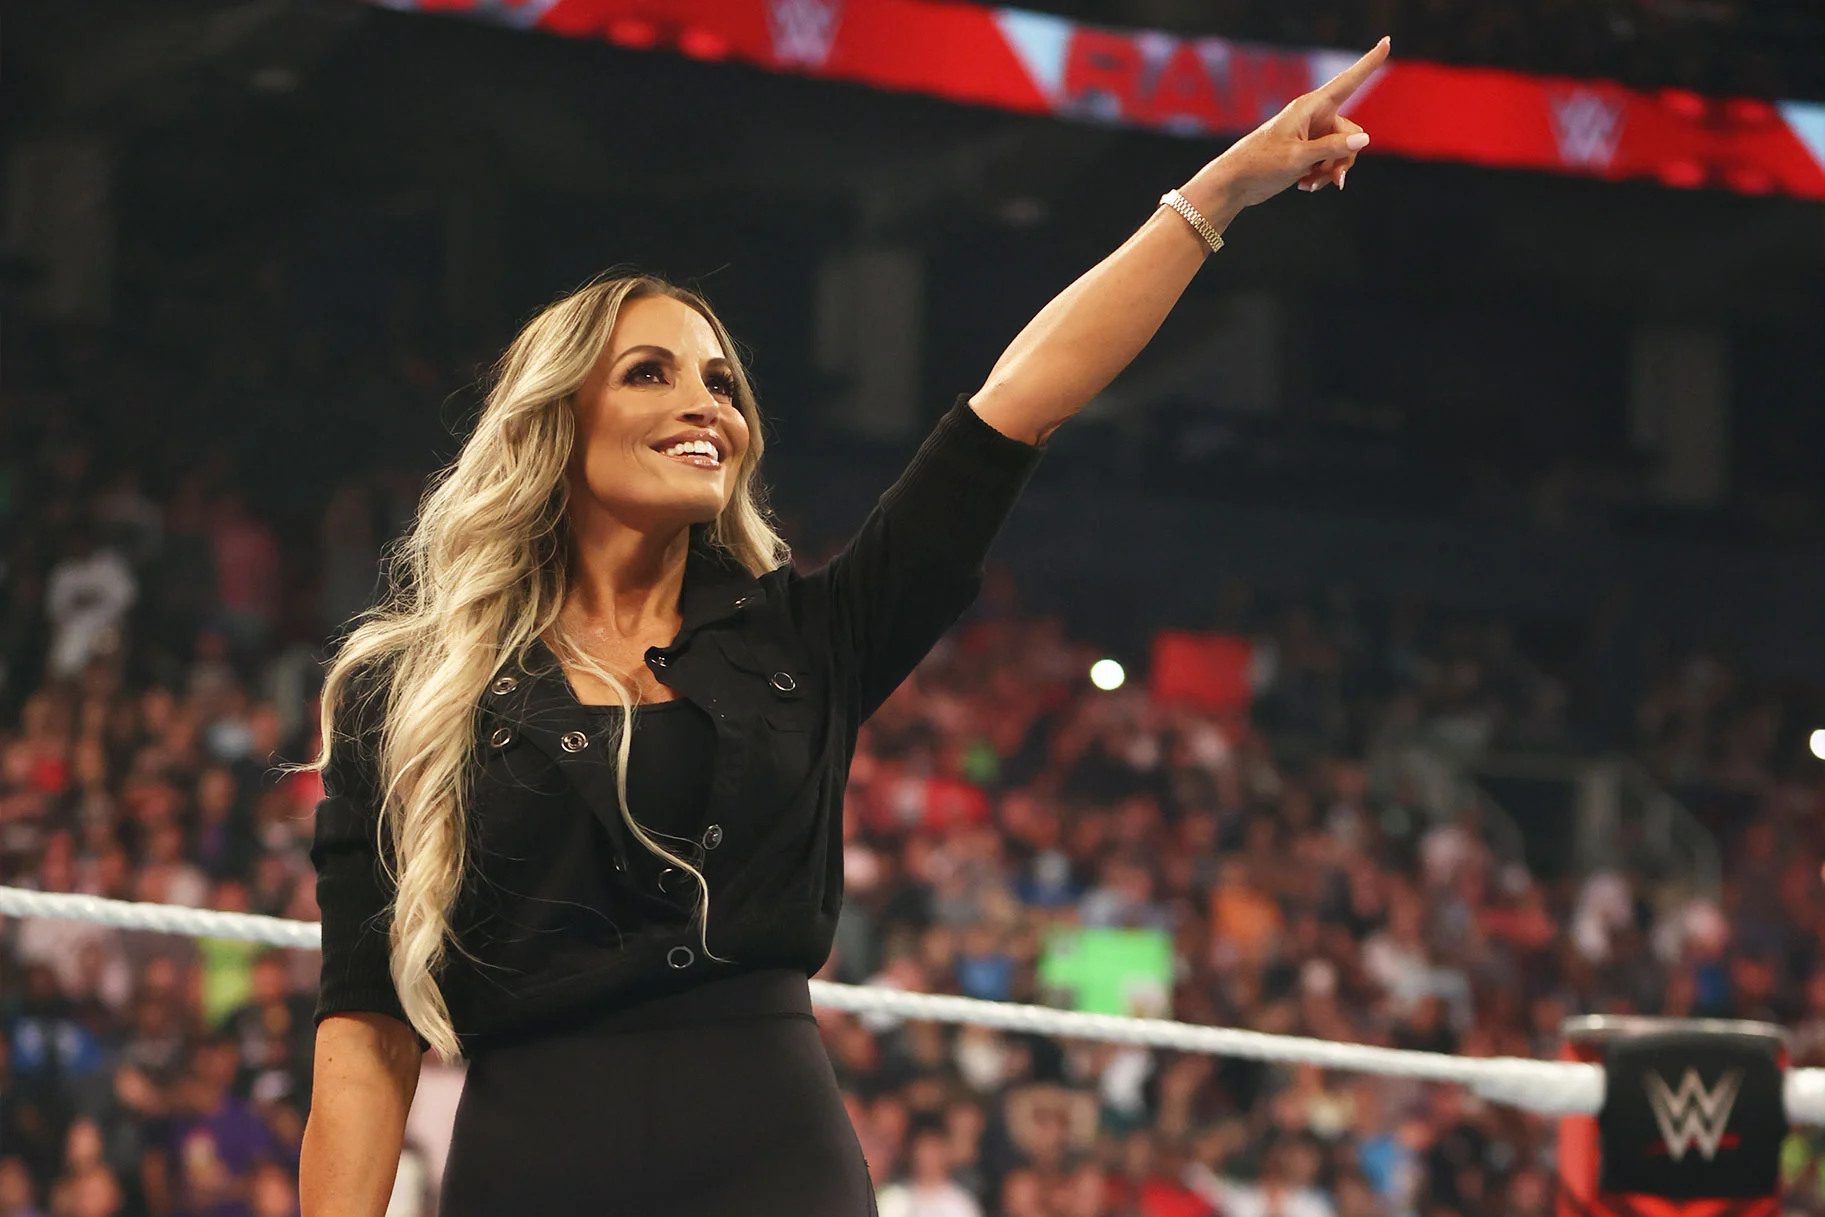 Who Is Ron Fisico? Age, Career, Bio And More Of Trish Stratus’s Husband